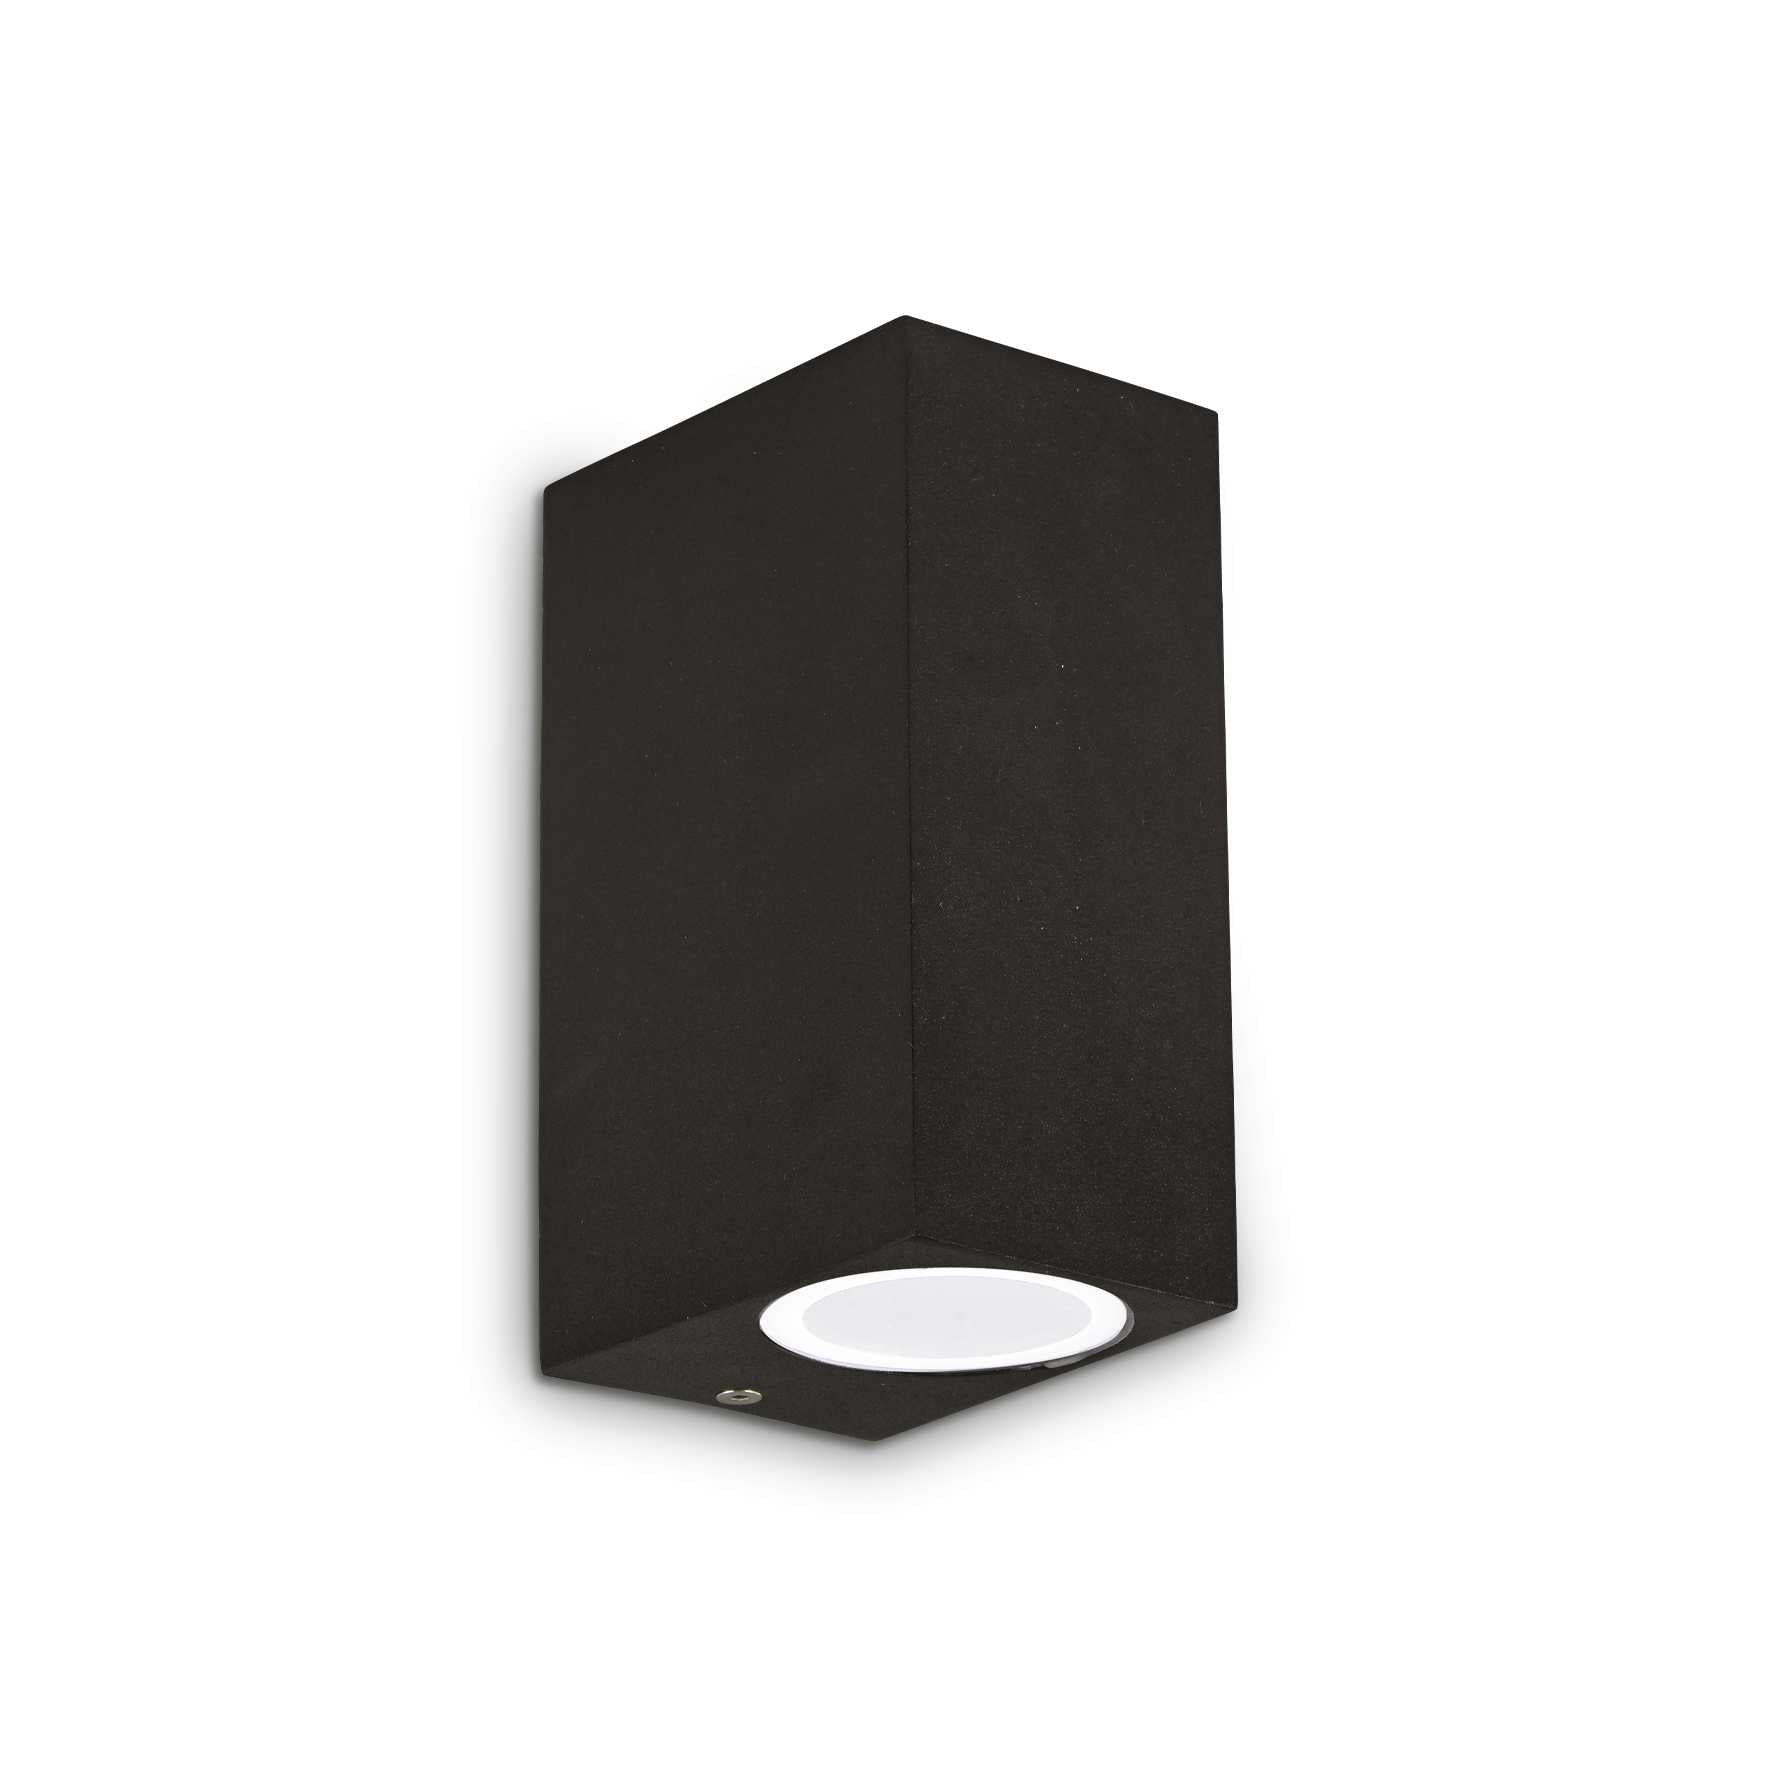 Up Wall light Fitting - Coffee/Anthracite/Black/White Finish - Cusack Lighting